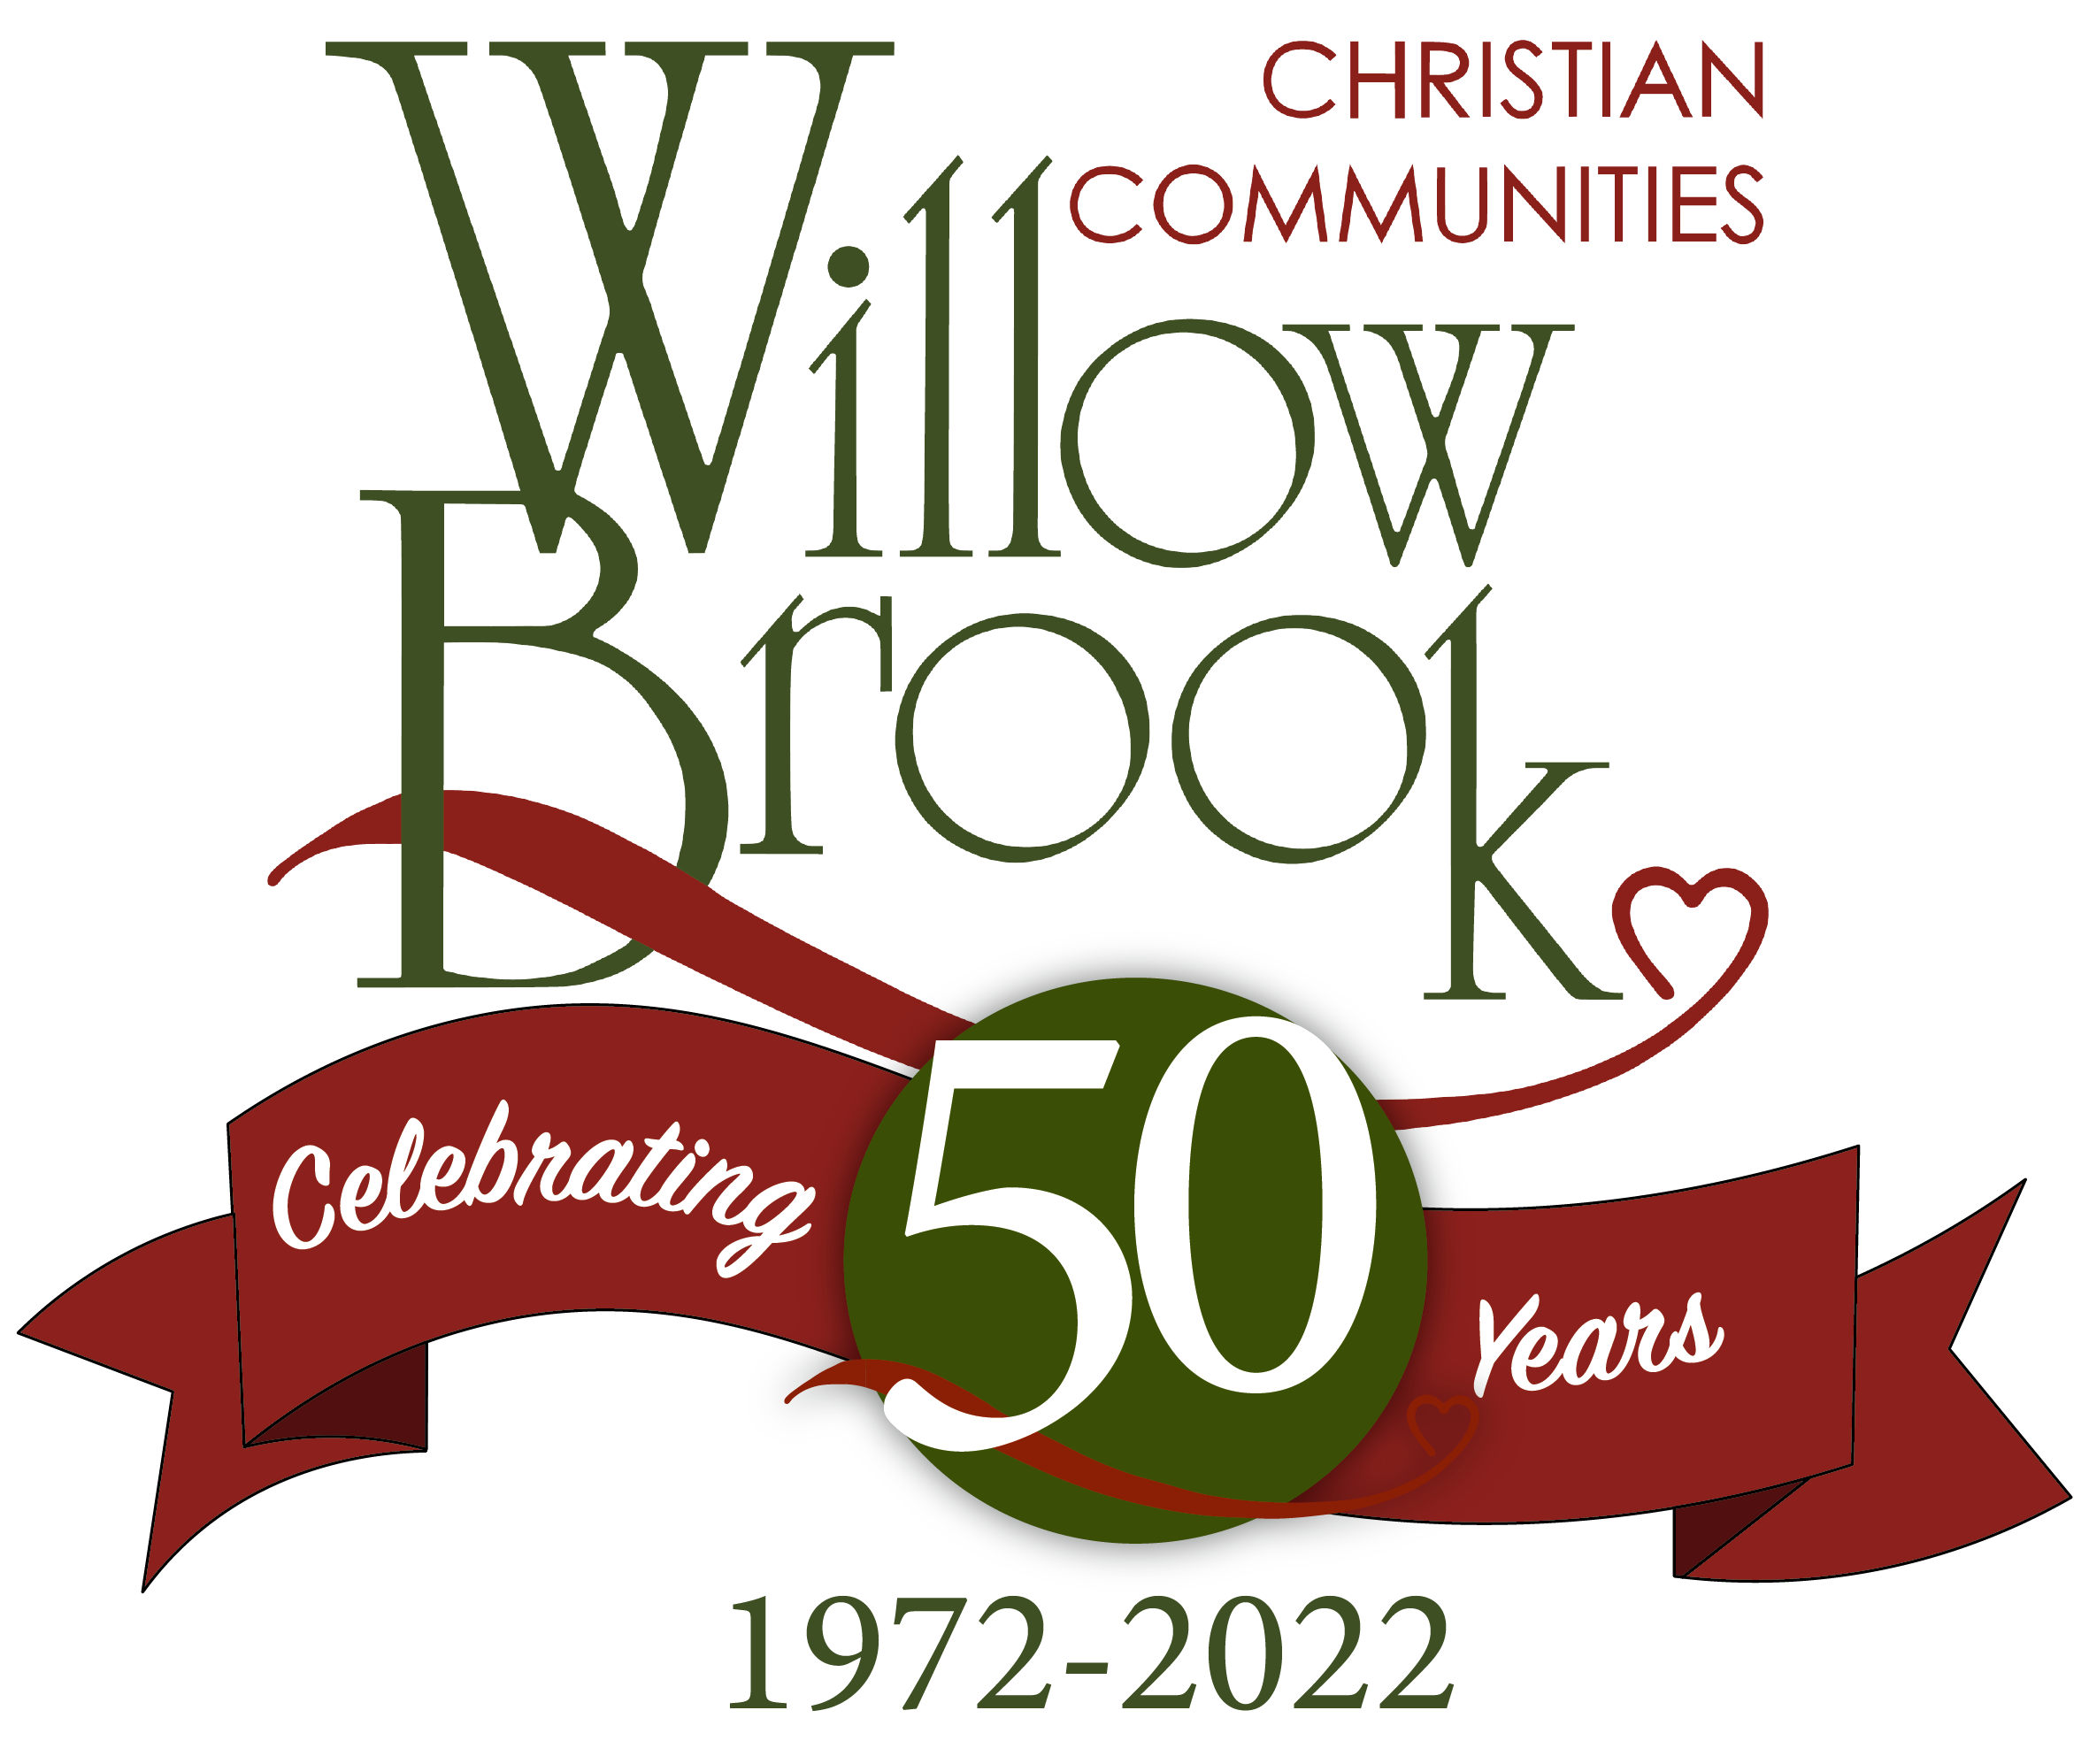 A. Willow Brook Christian Communities (Champions Club)